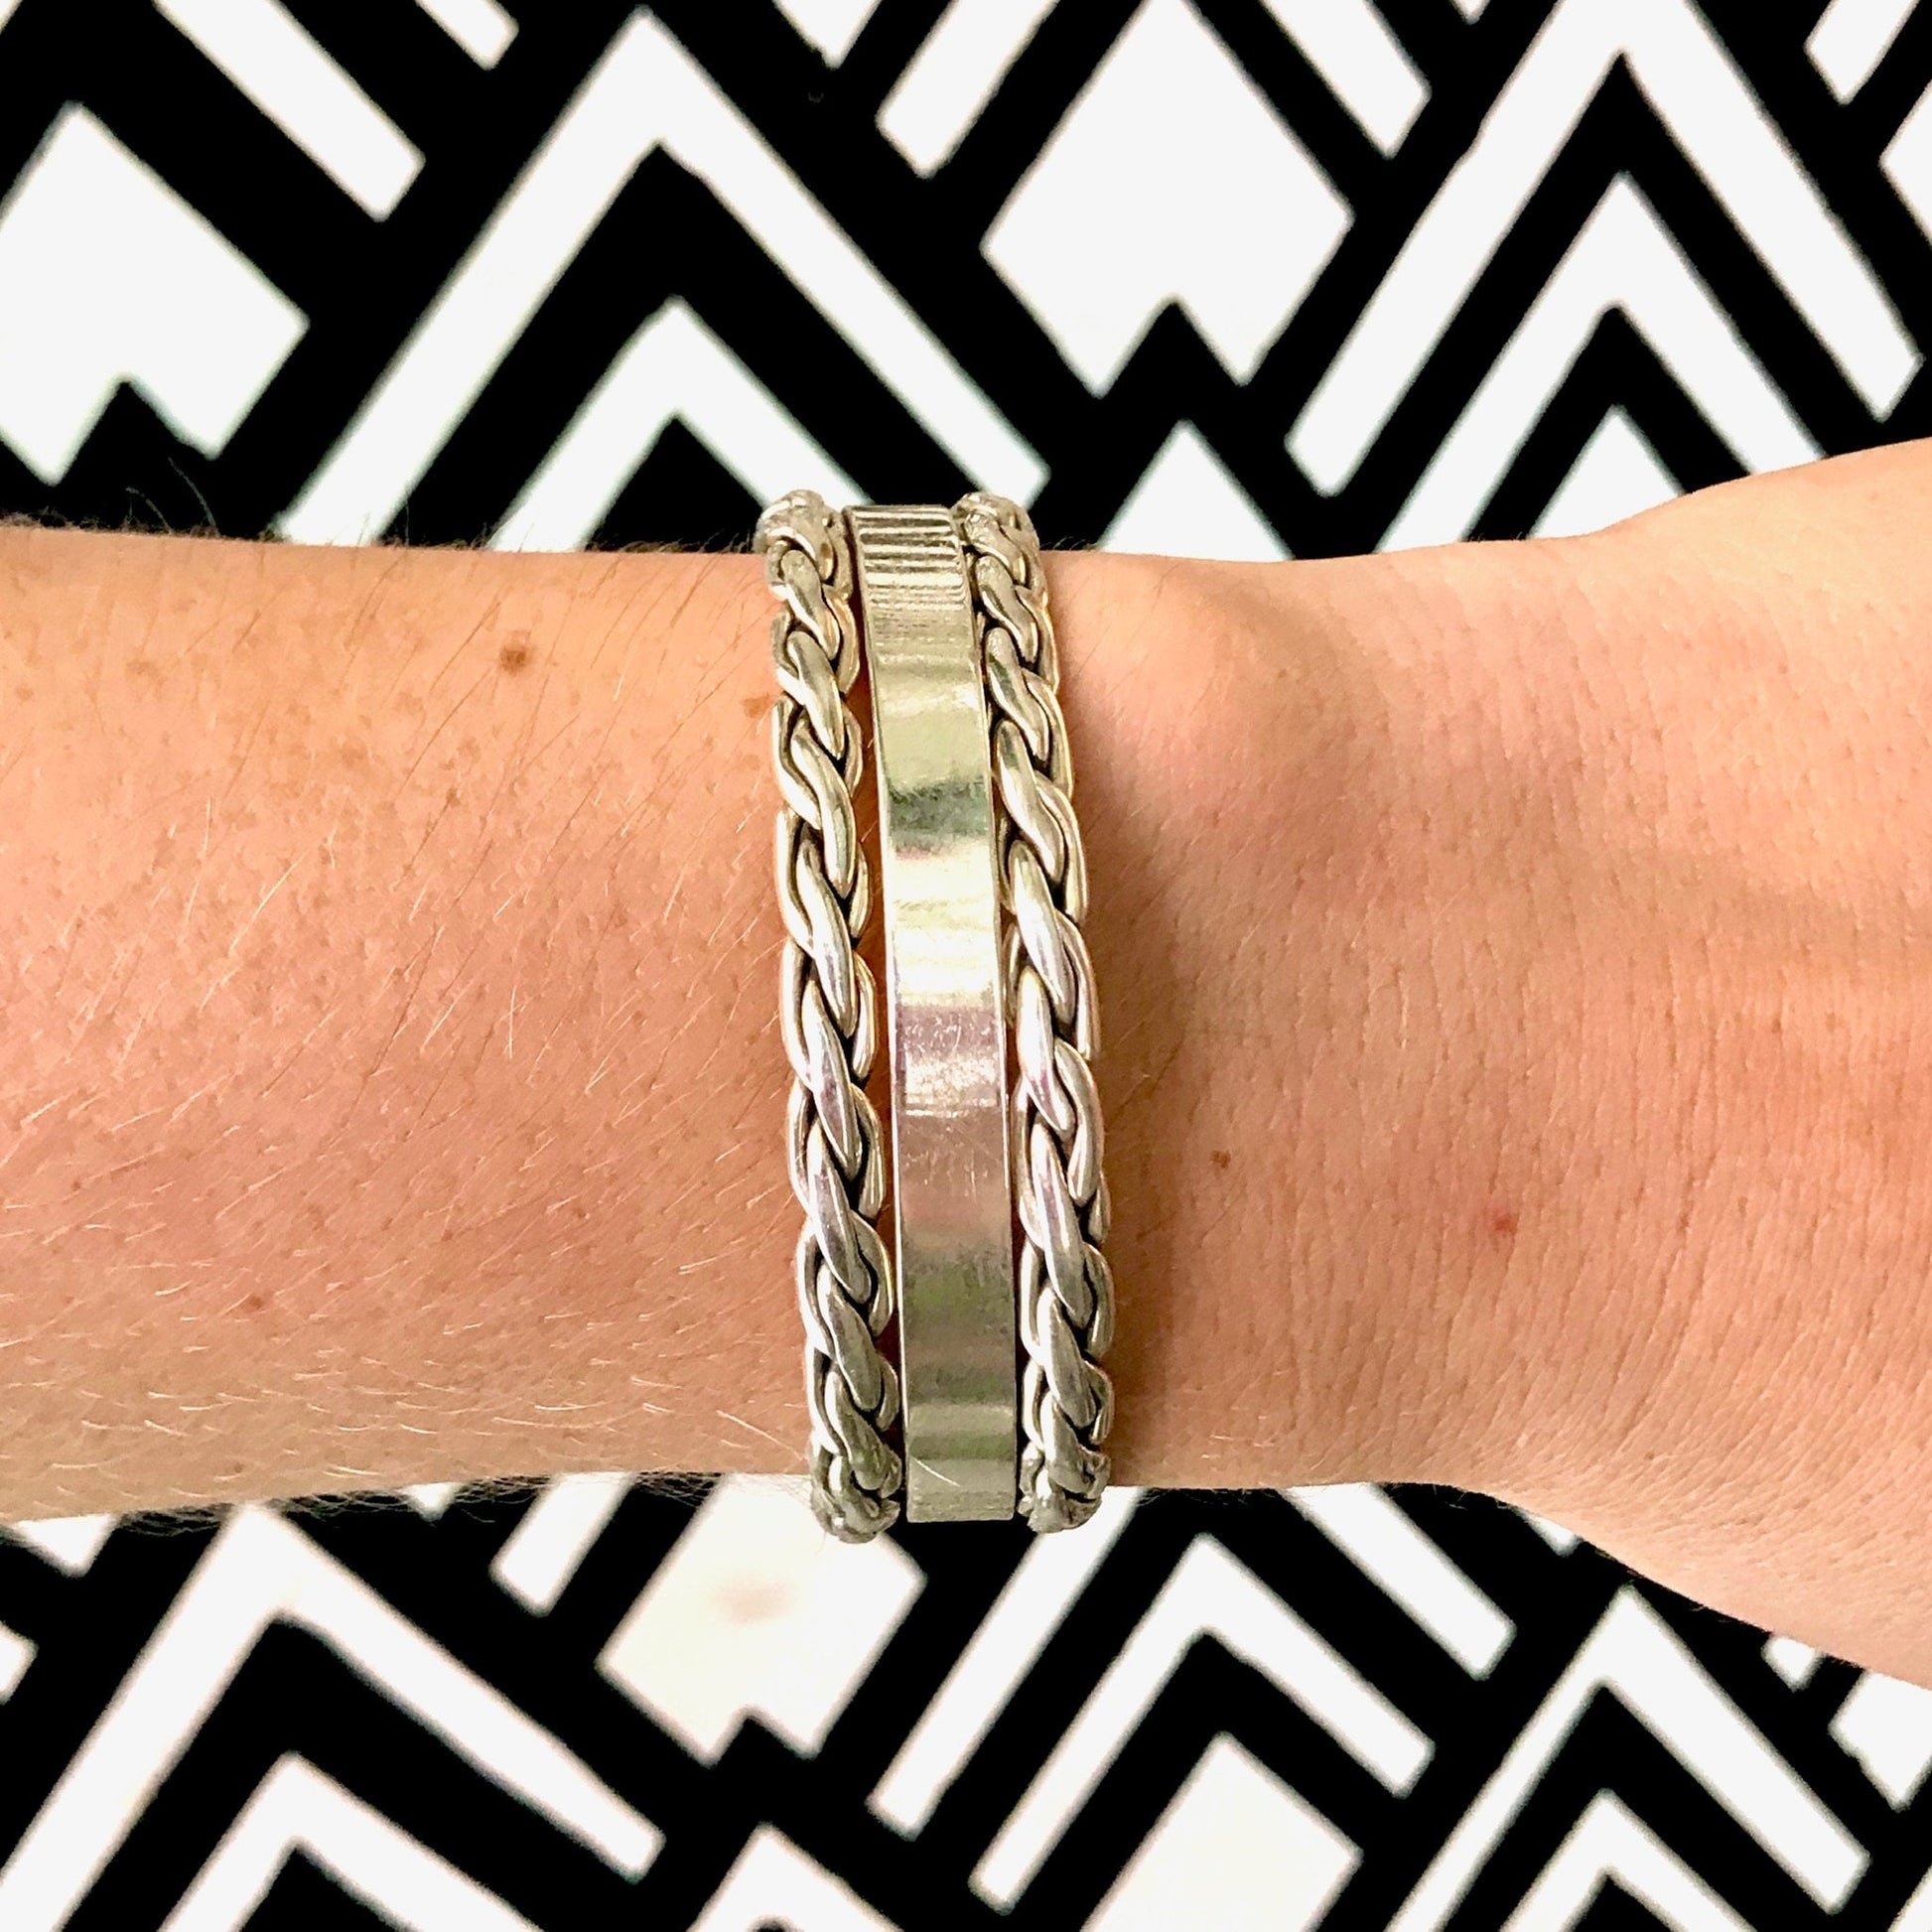 Vintage sterling silver weave cuff bracelet with minimalist design, made in Mexico, stamped "Mex 925 TE-51", shown on wrist against geometric black and white patterned background.